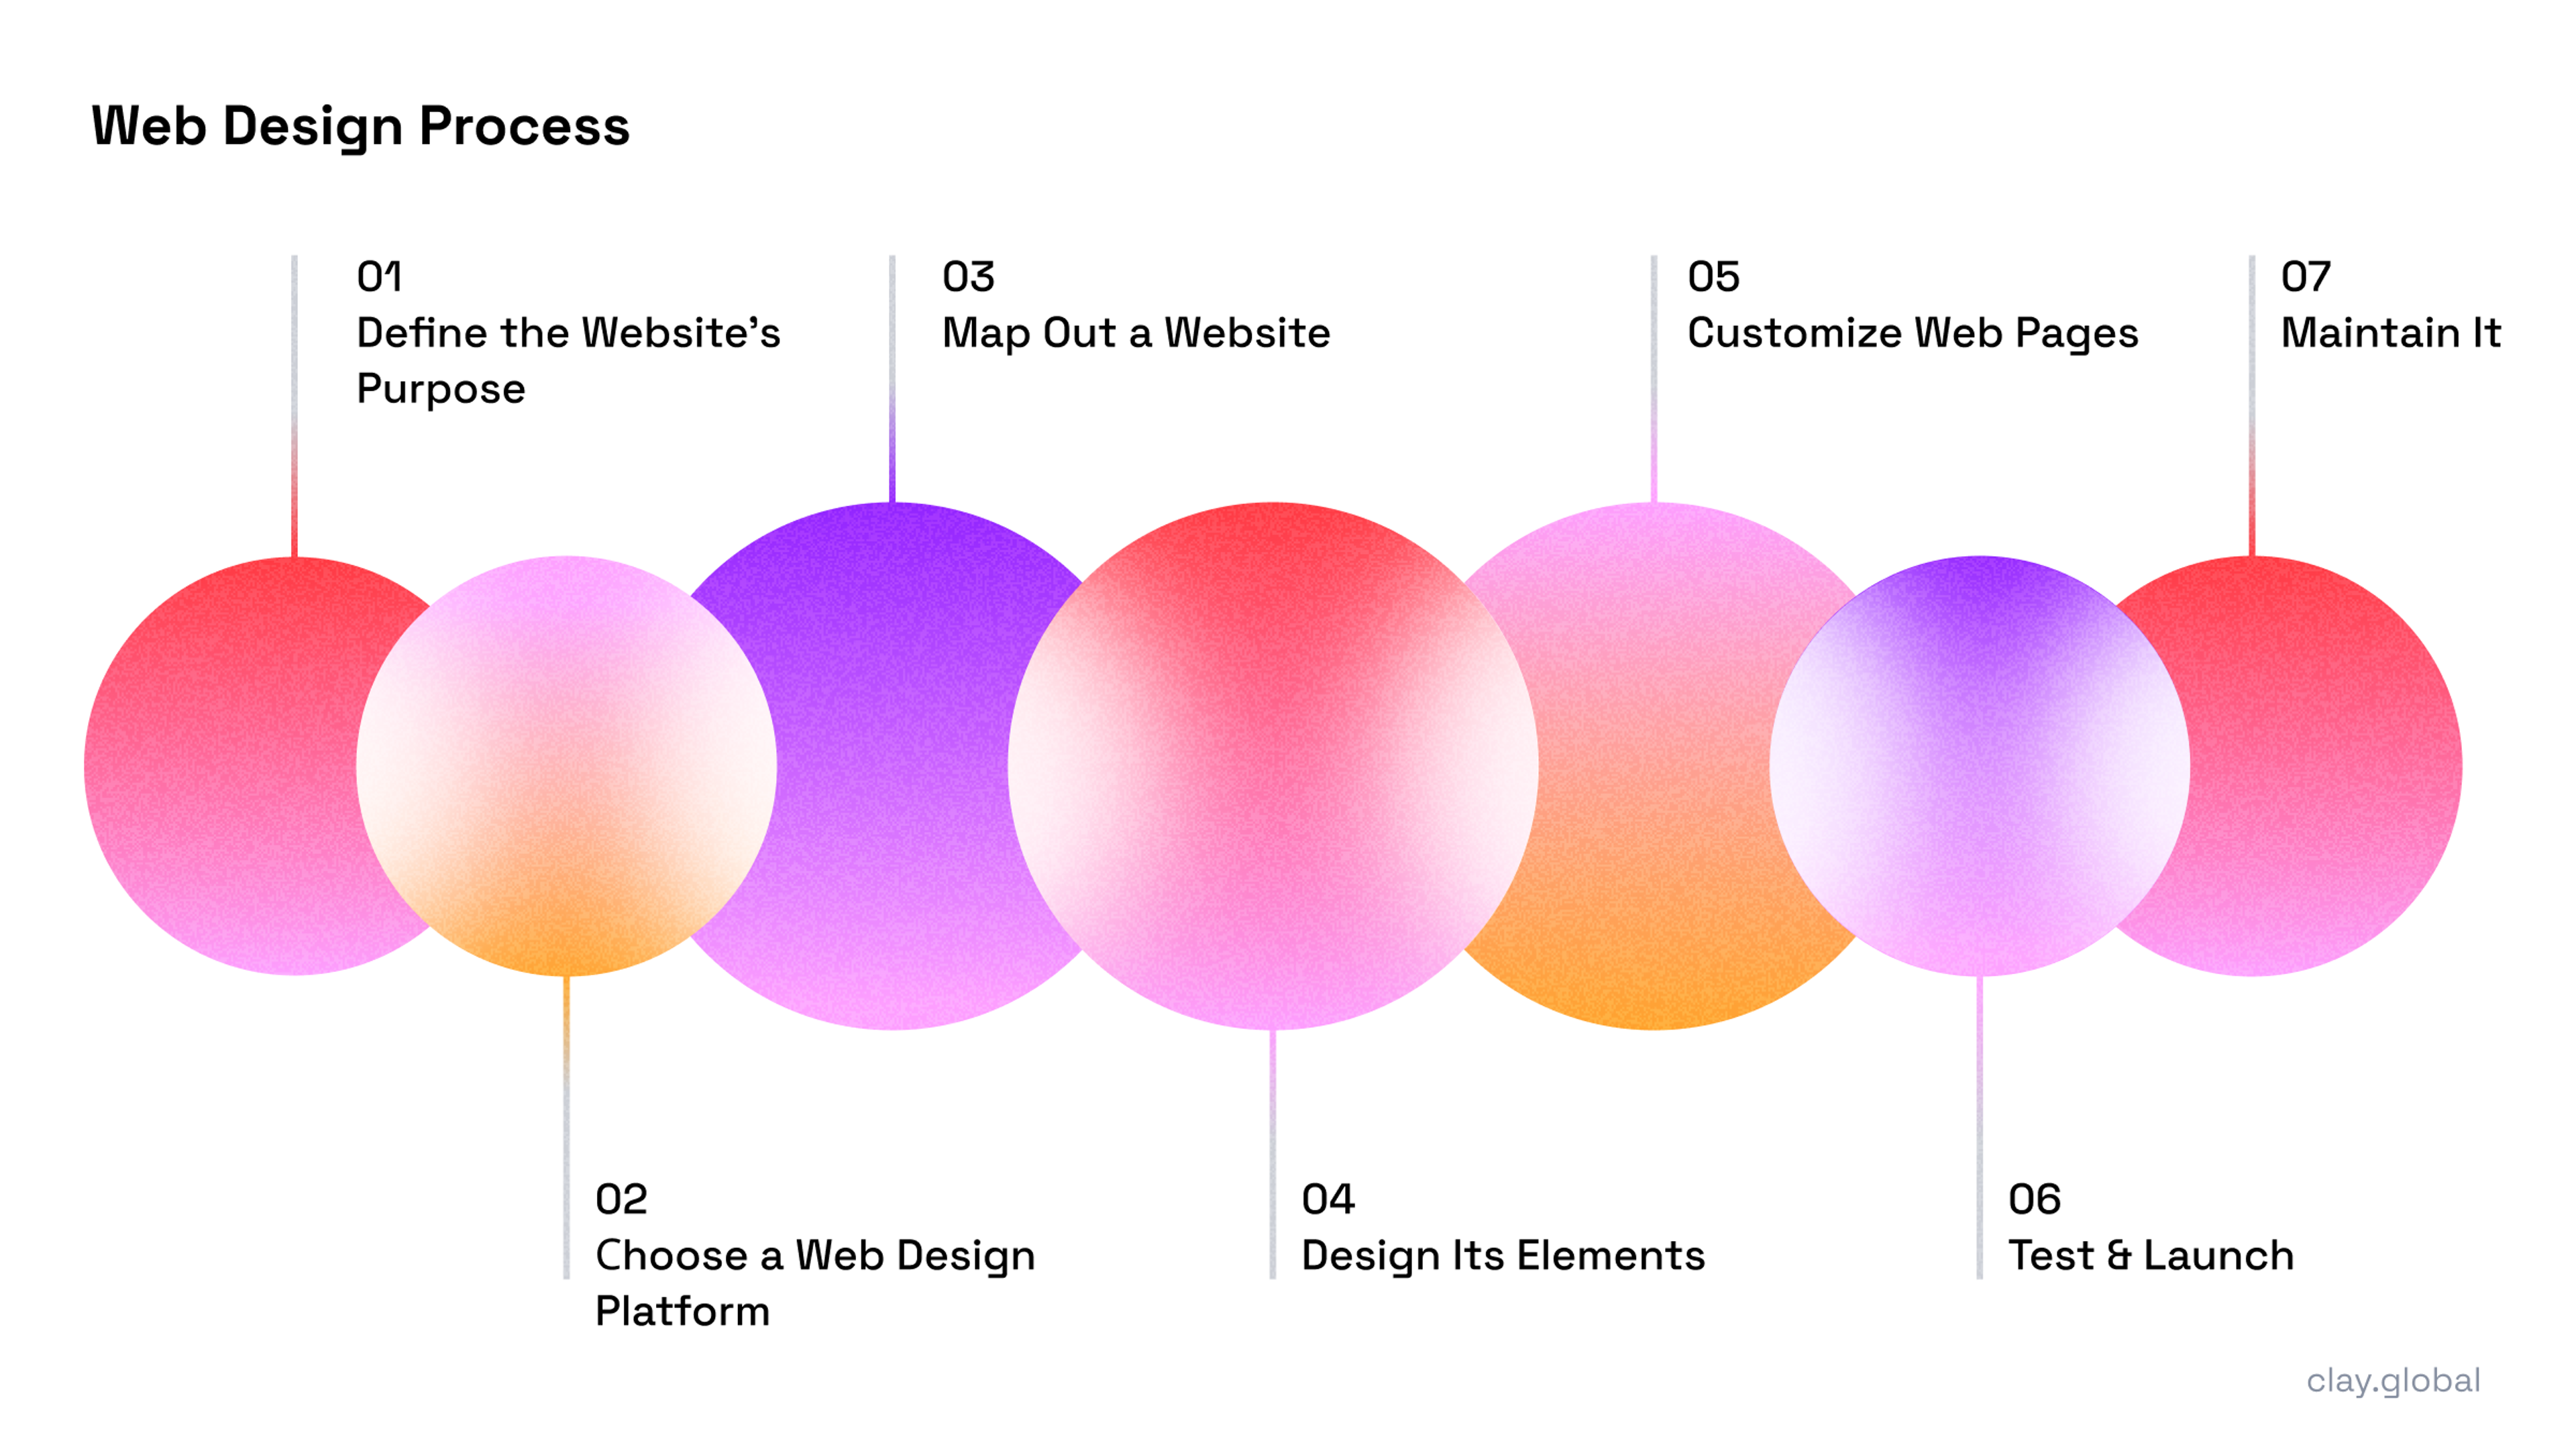 Overview of the web design process